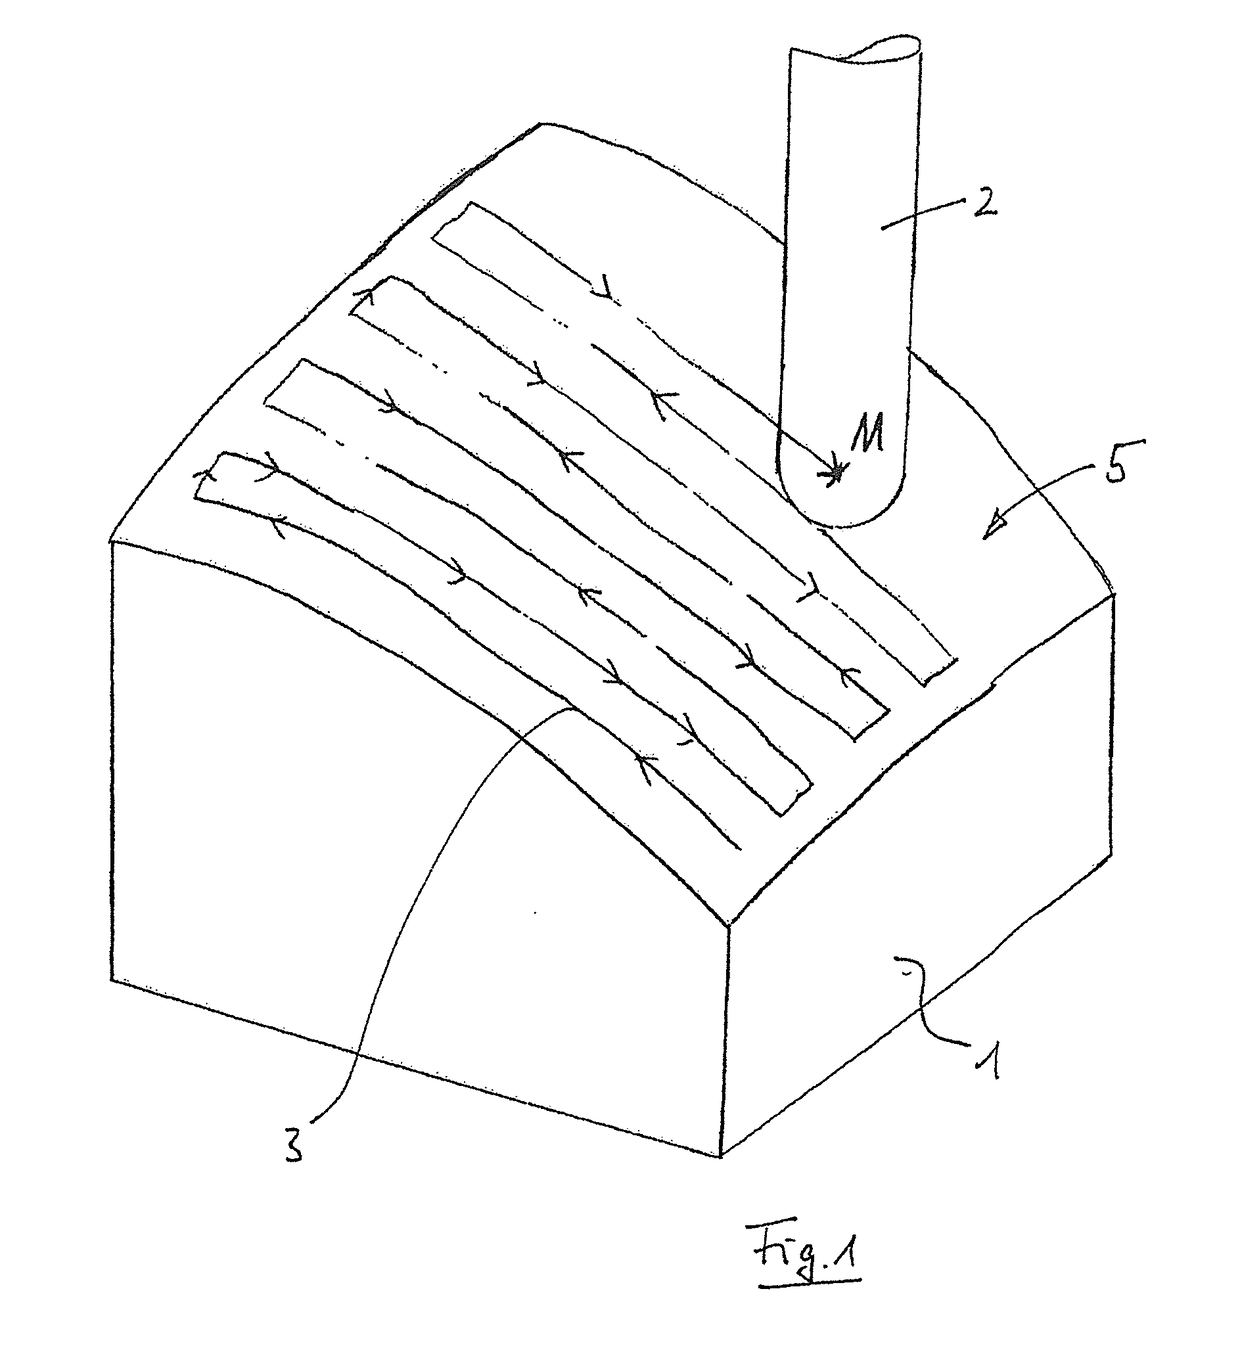 Method for machining a workpiece by means of a chip-removing tool on a numerically-controlled machine tool